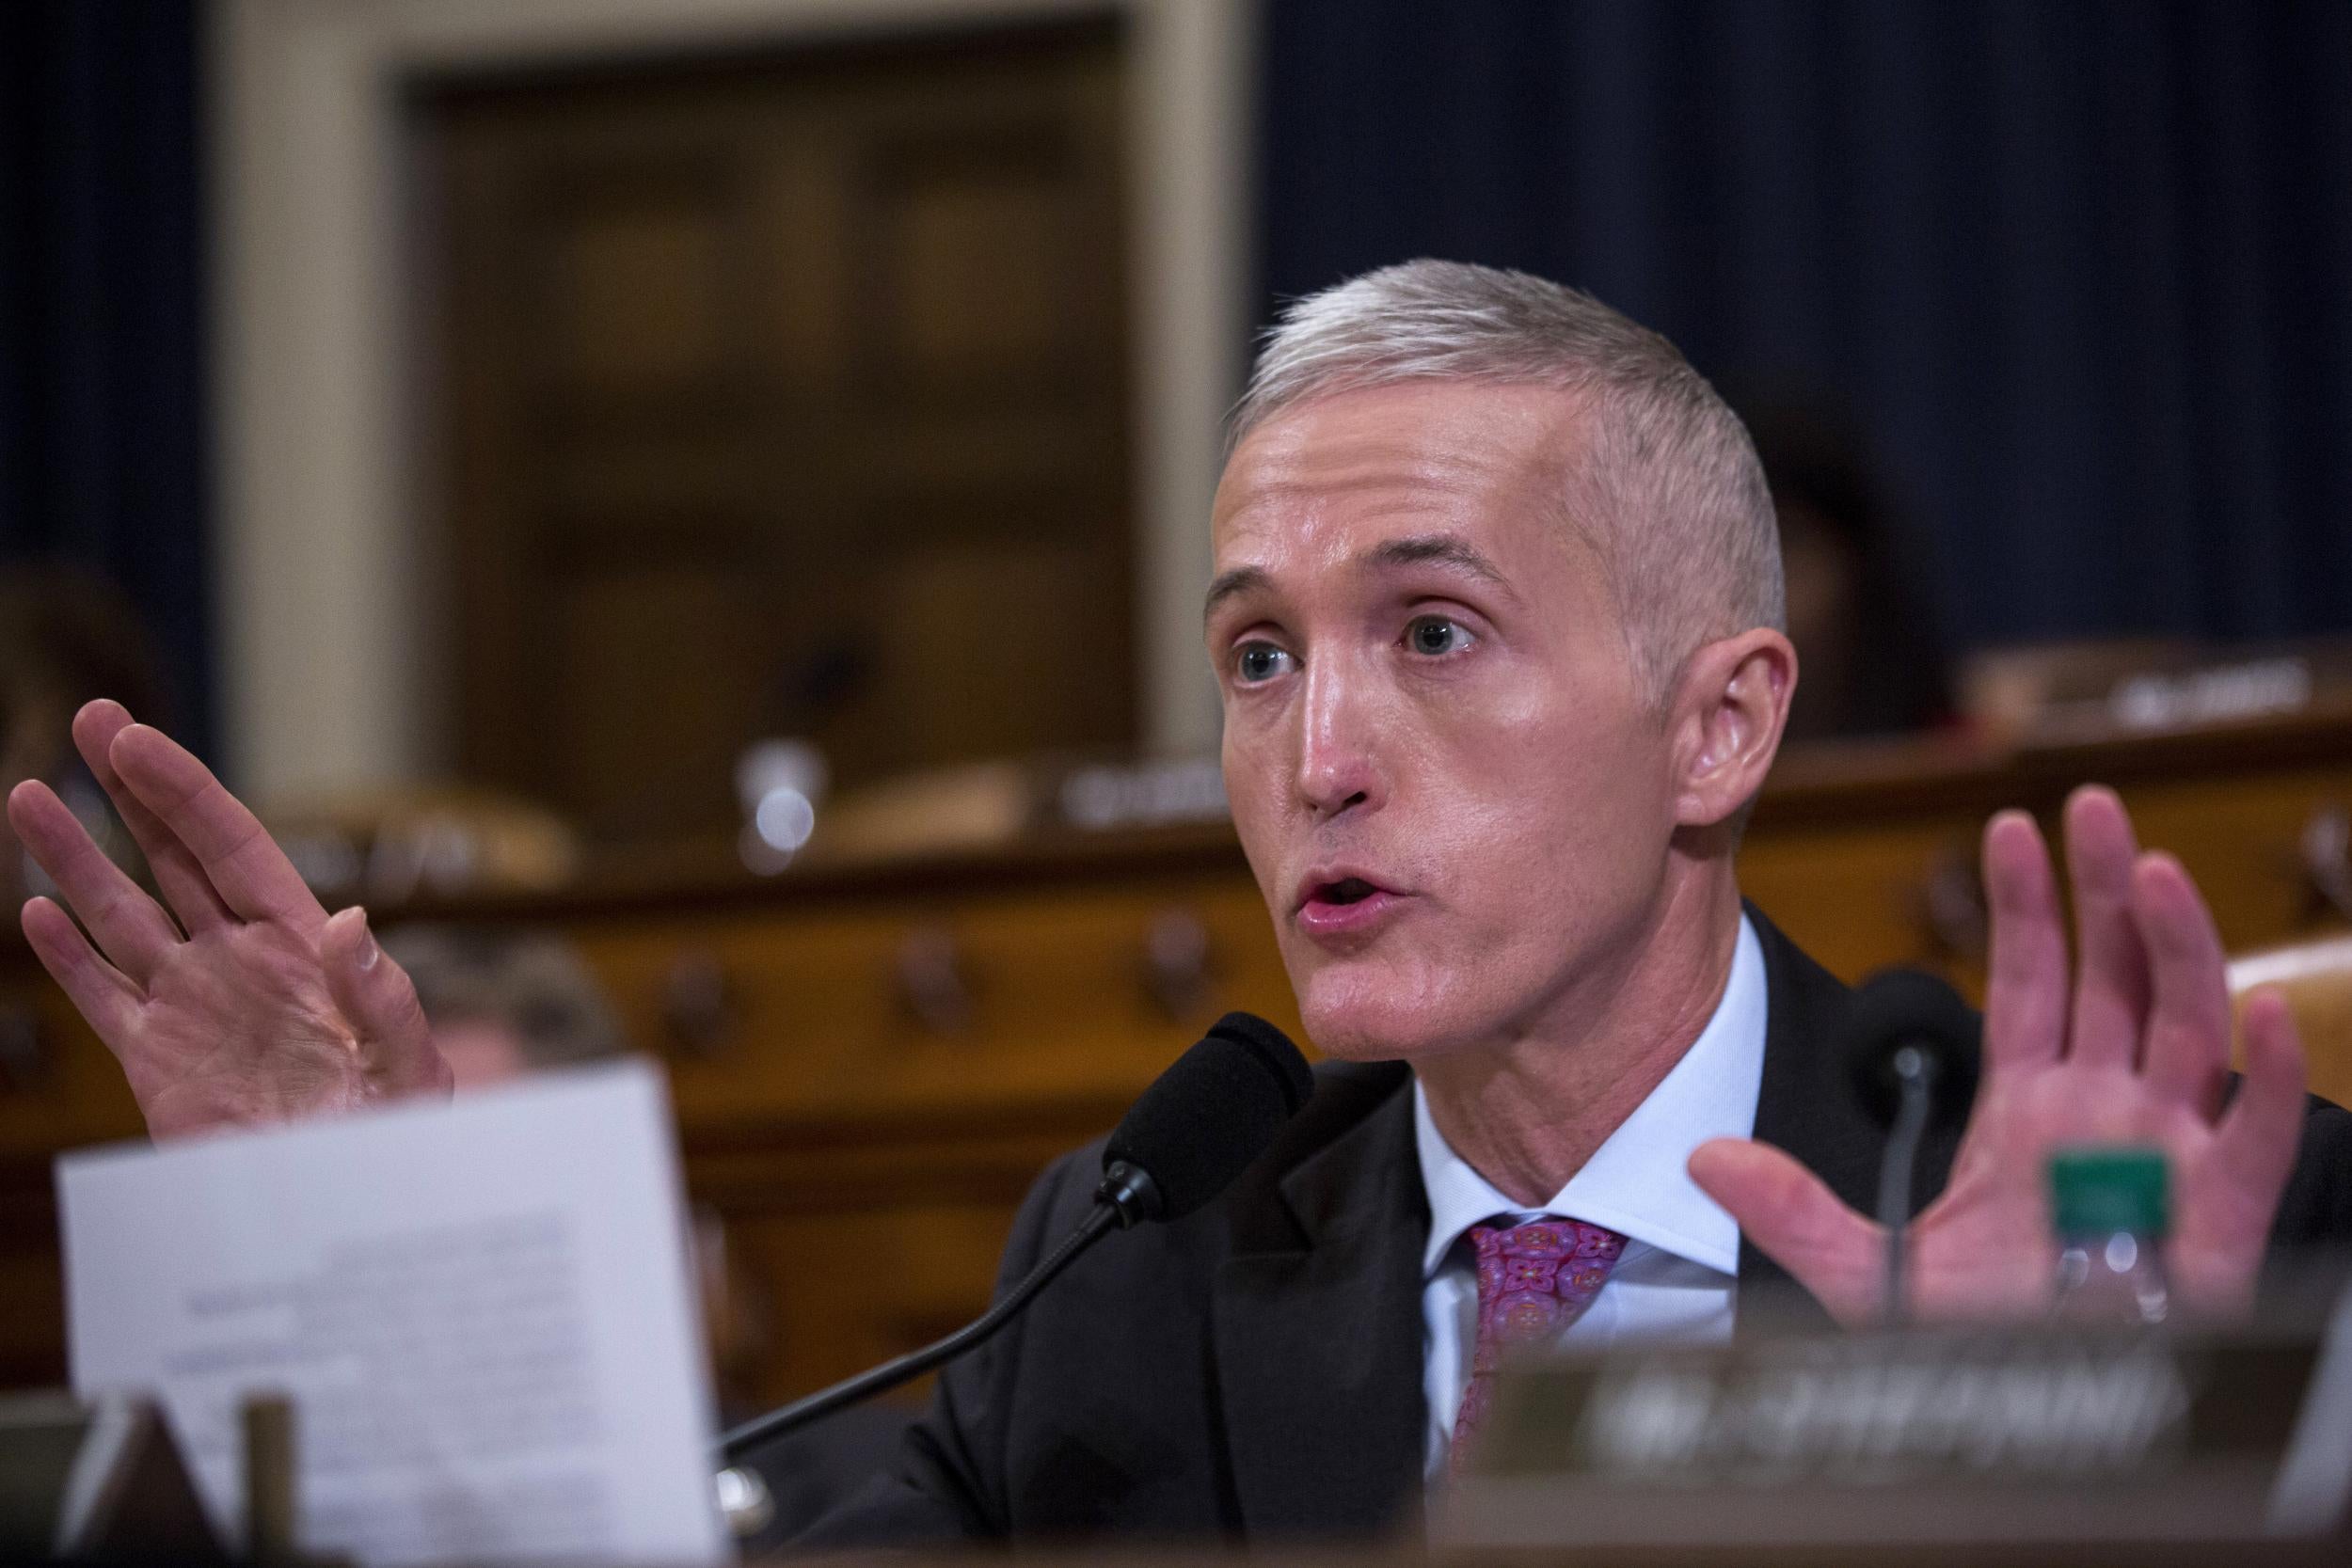 Mr Gowdy leads the committee launching the probe